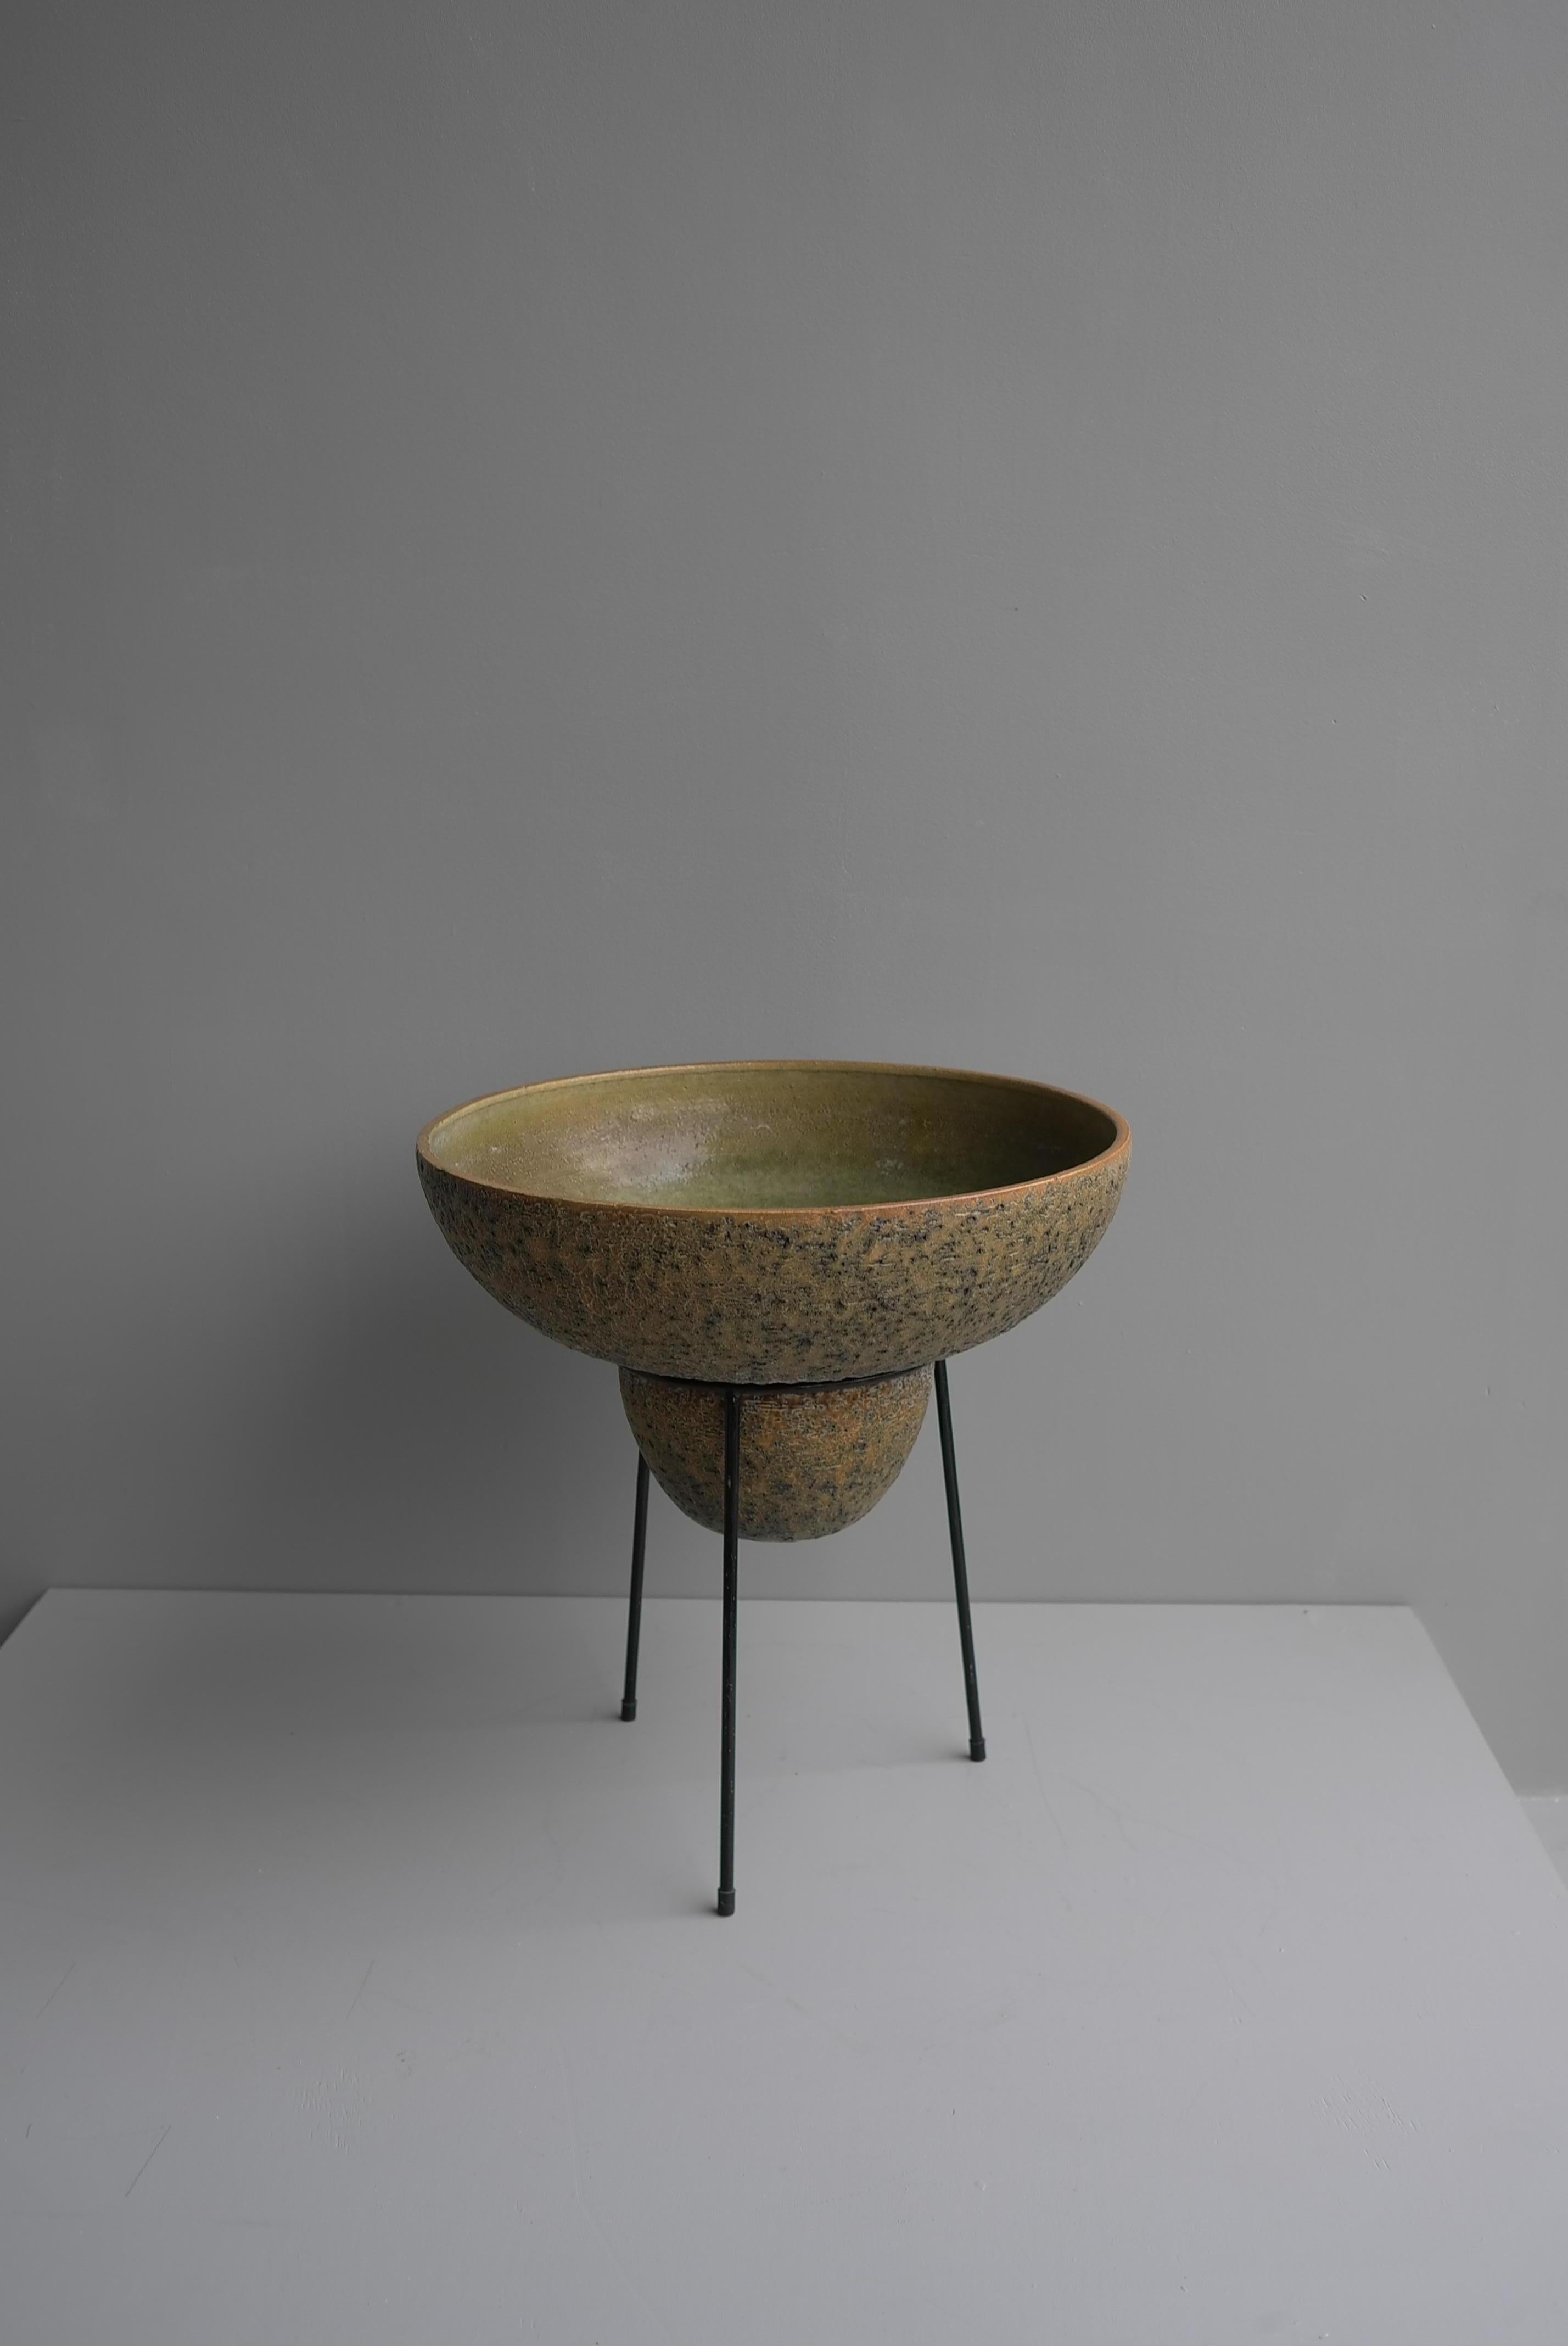 Large green ceramic decorative chasepot on a metal tripod stand by Trio, Netherlands, 1965

The Atelier of Trio is based in The Netherlands in a traditional ceramic area. The factory exists since 1965 and is established by Piet Hinssen.